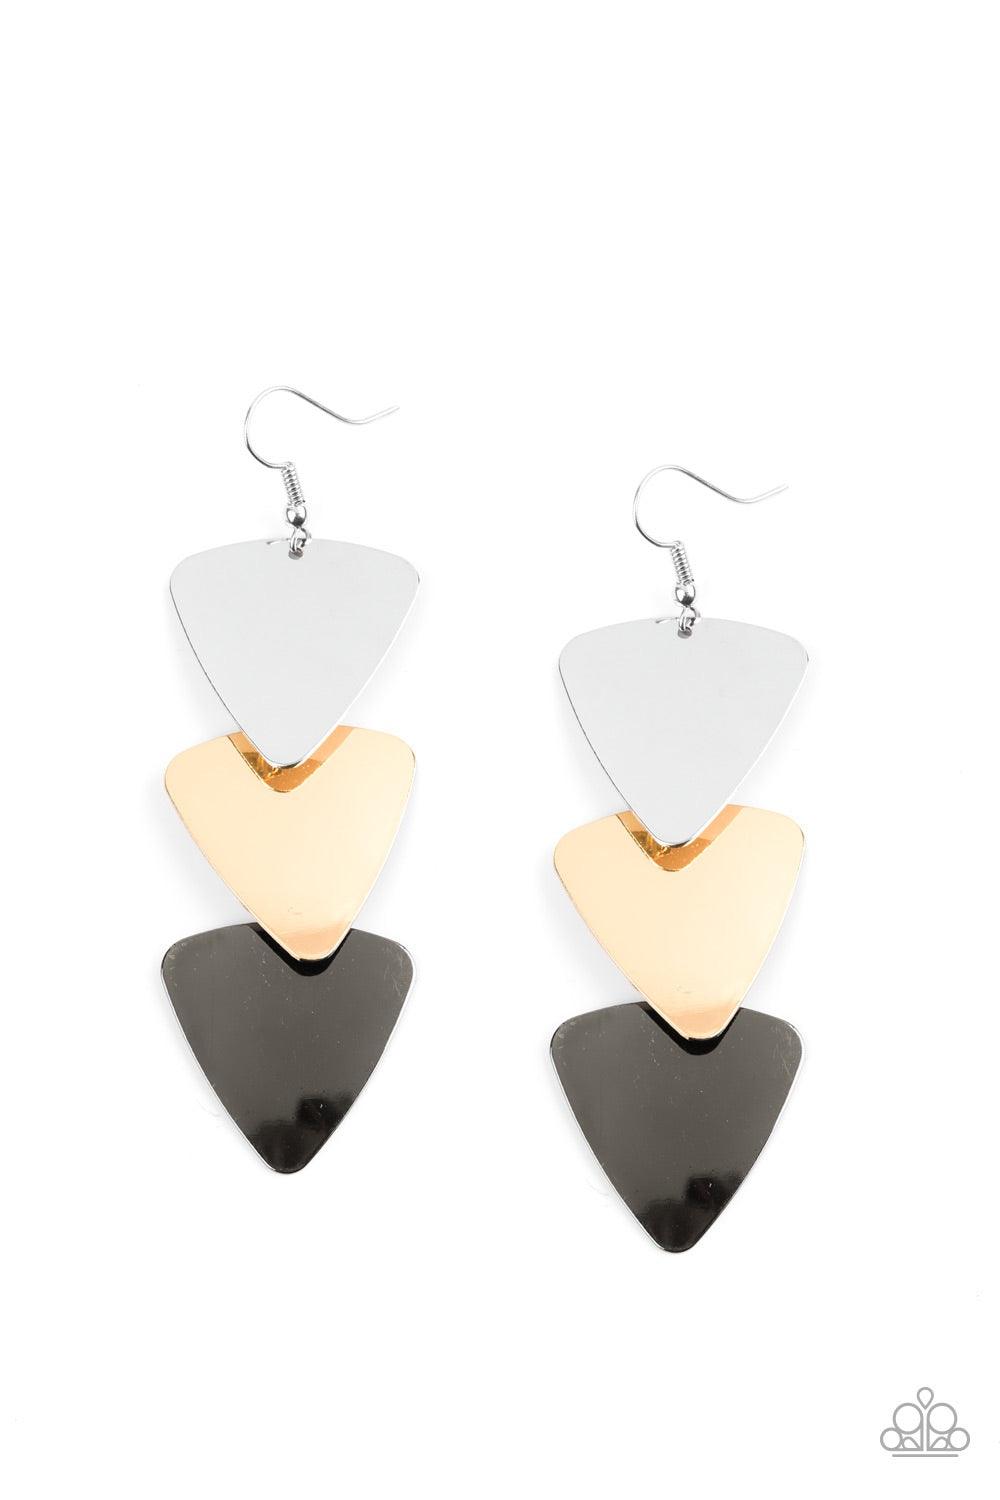 Paparazzi Accessories Terra Trek - Multi Brushed in a high-sheen shimmer, glistening silver, gold, and gunmetal triangular frames cascade from the ear, creating an edgy lure. Earring attaches to a standard fishhook fitting. Jewelry